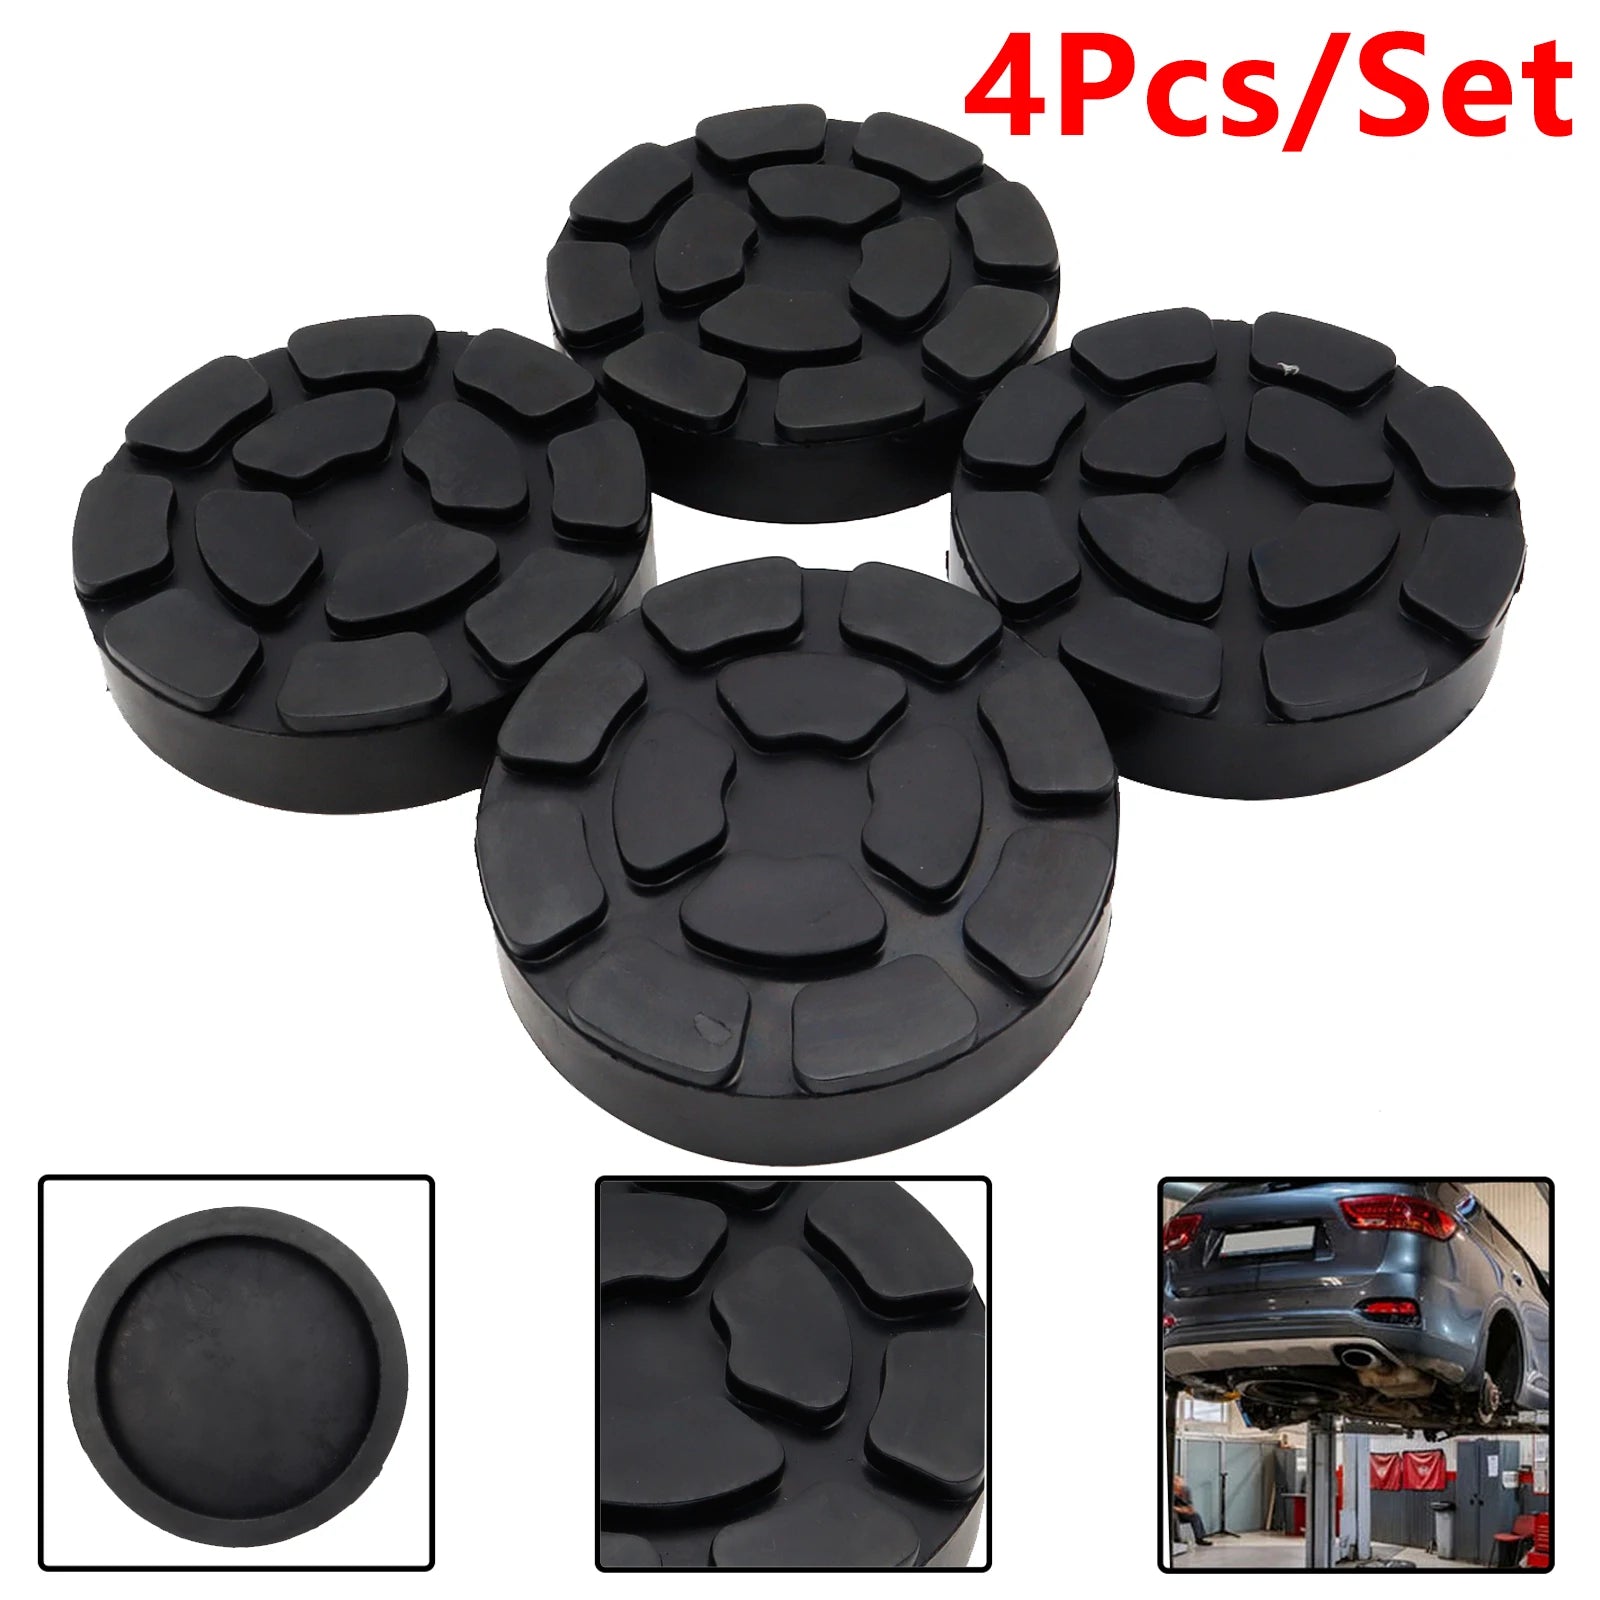 Universal Car Rubber Jack Pad Frame Protector Hydraulic Ramp Trolley Jack Adapter for Pinch Weld Side Lifting Disk Jacking Tool